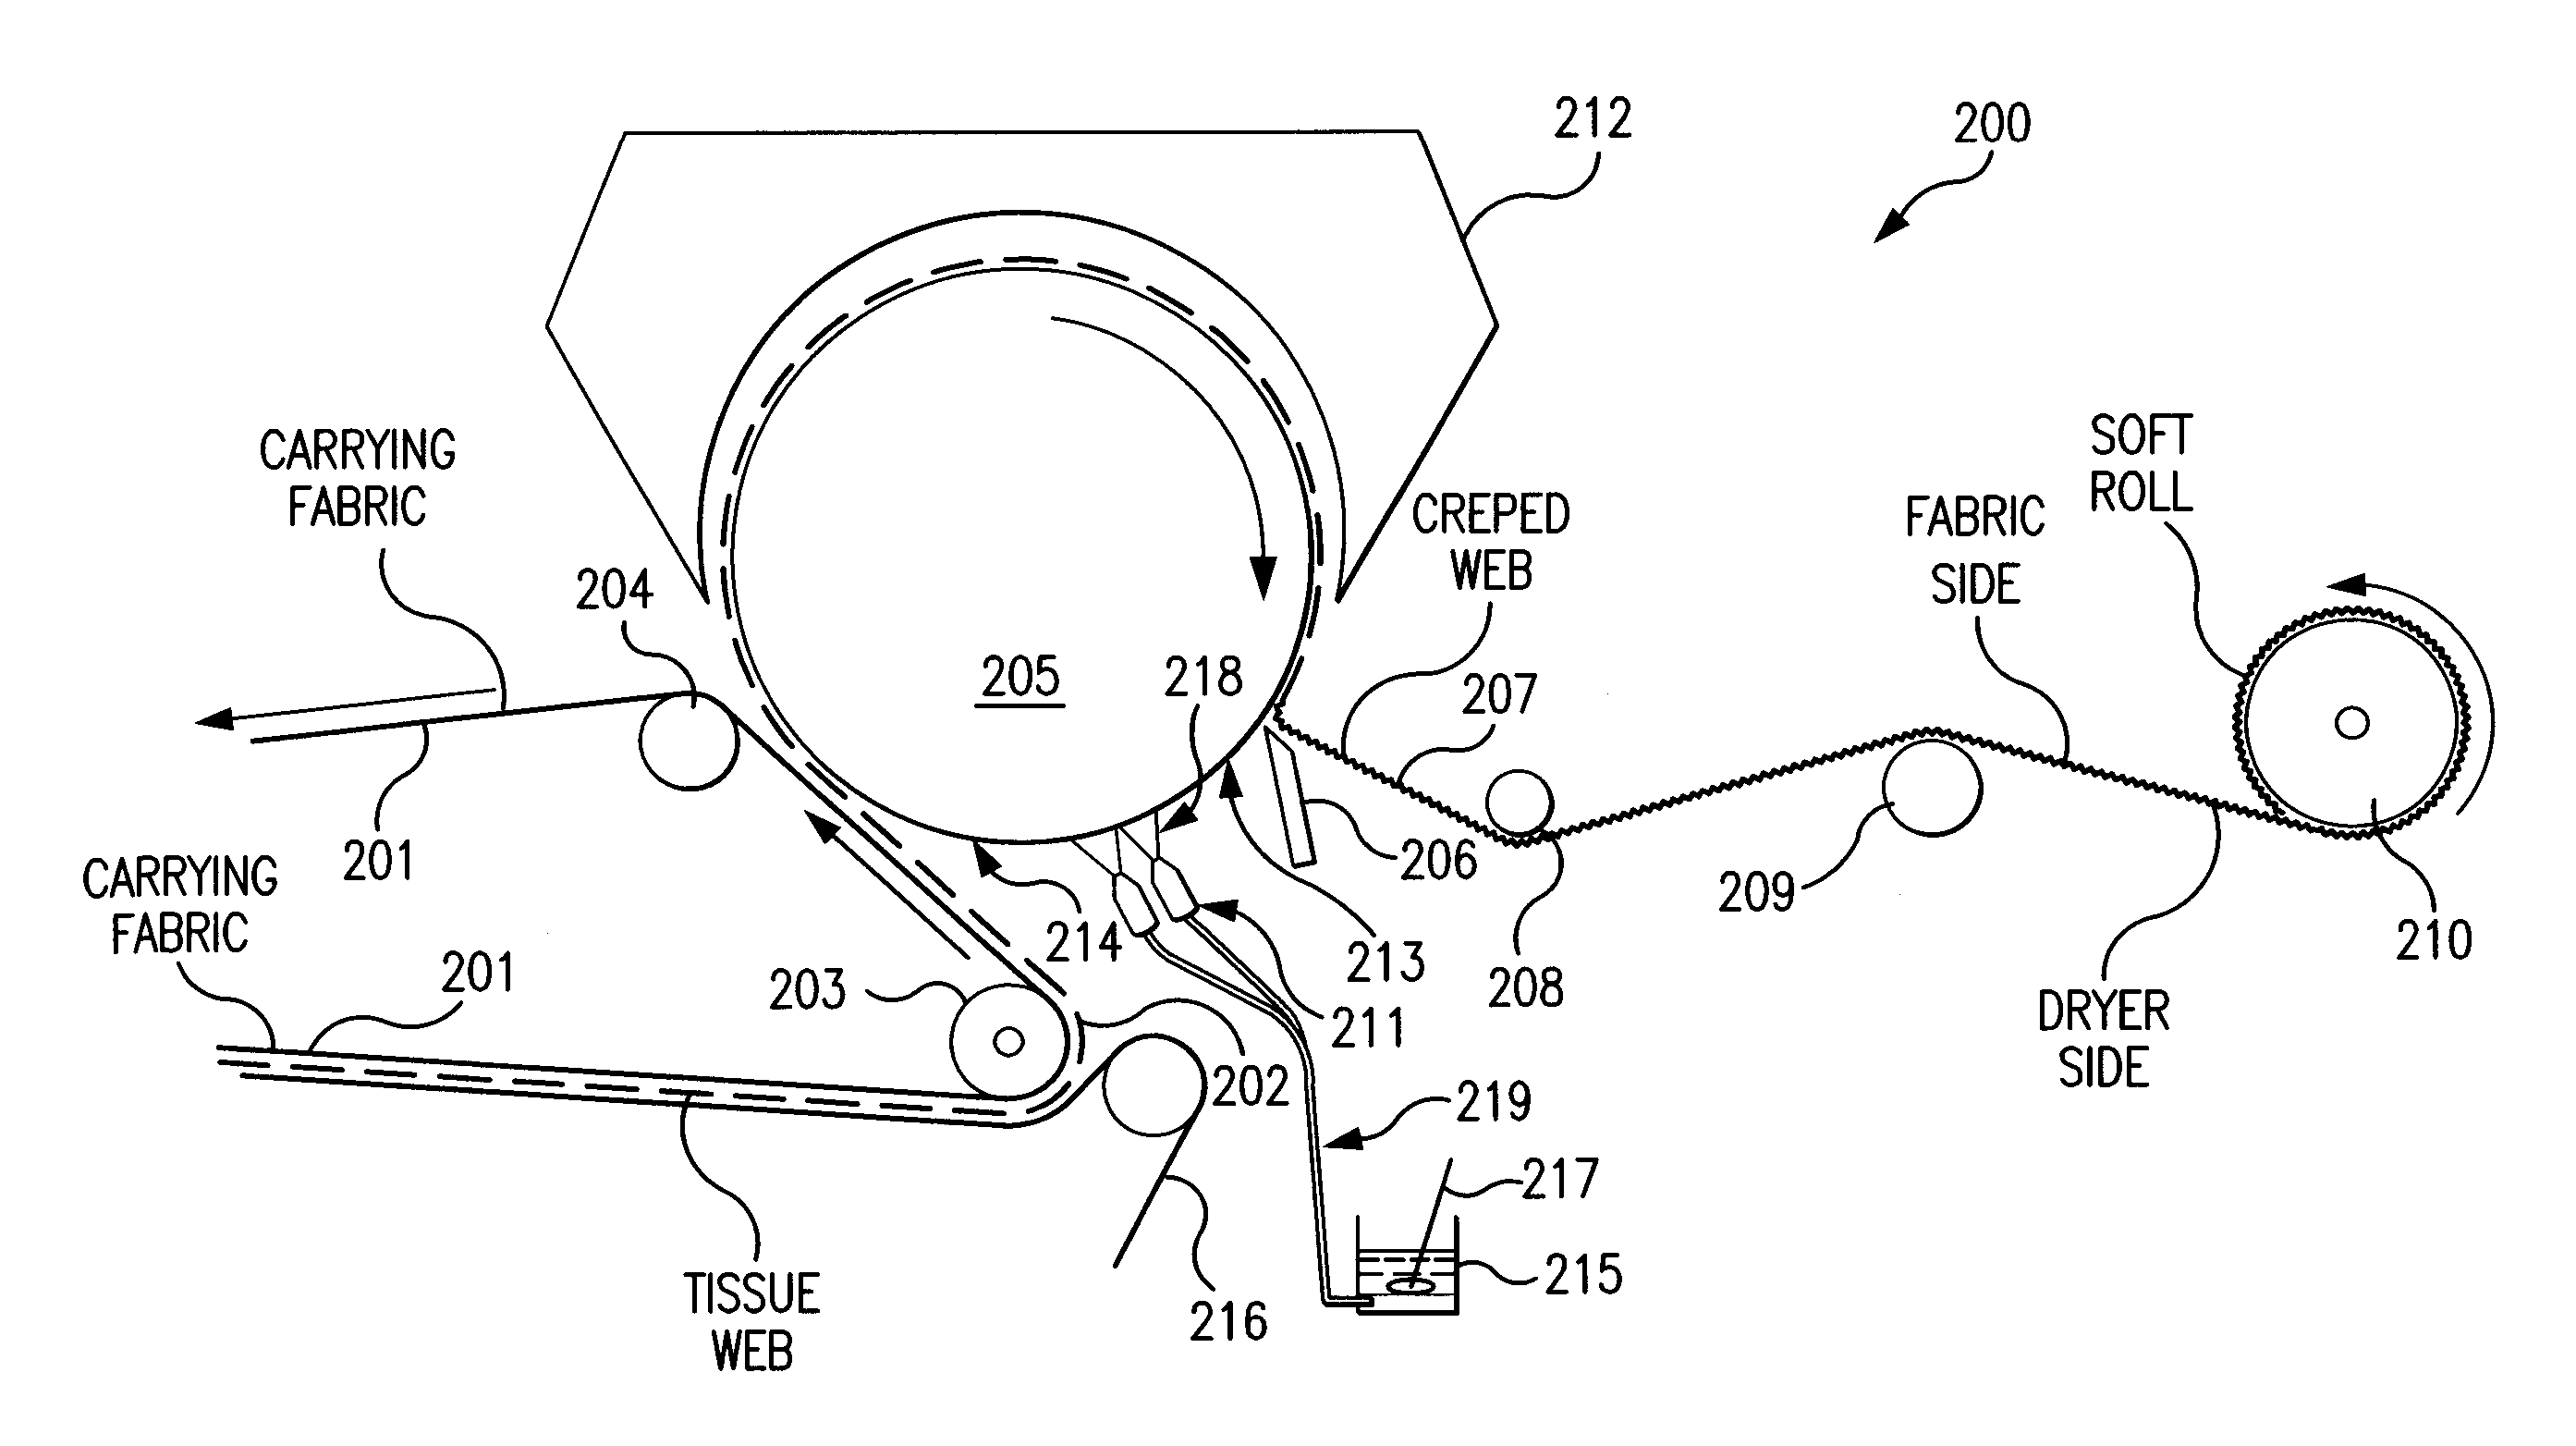 Creping Methods Using pH-Modified Creping Adhesive Compositions